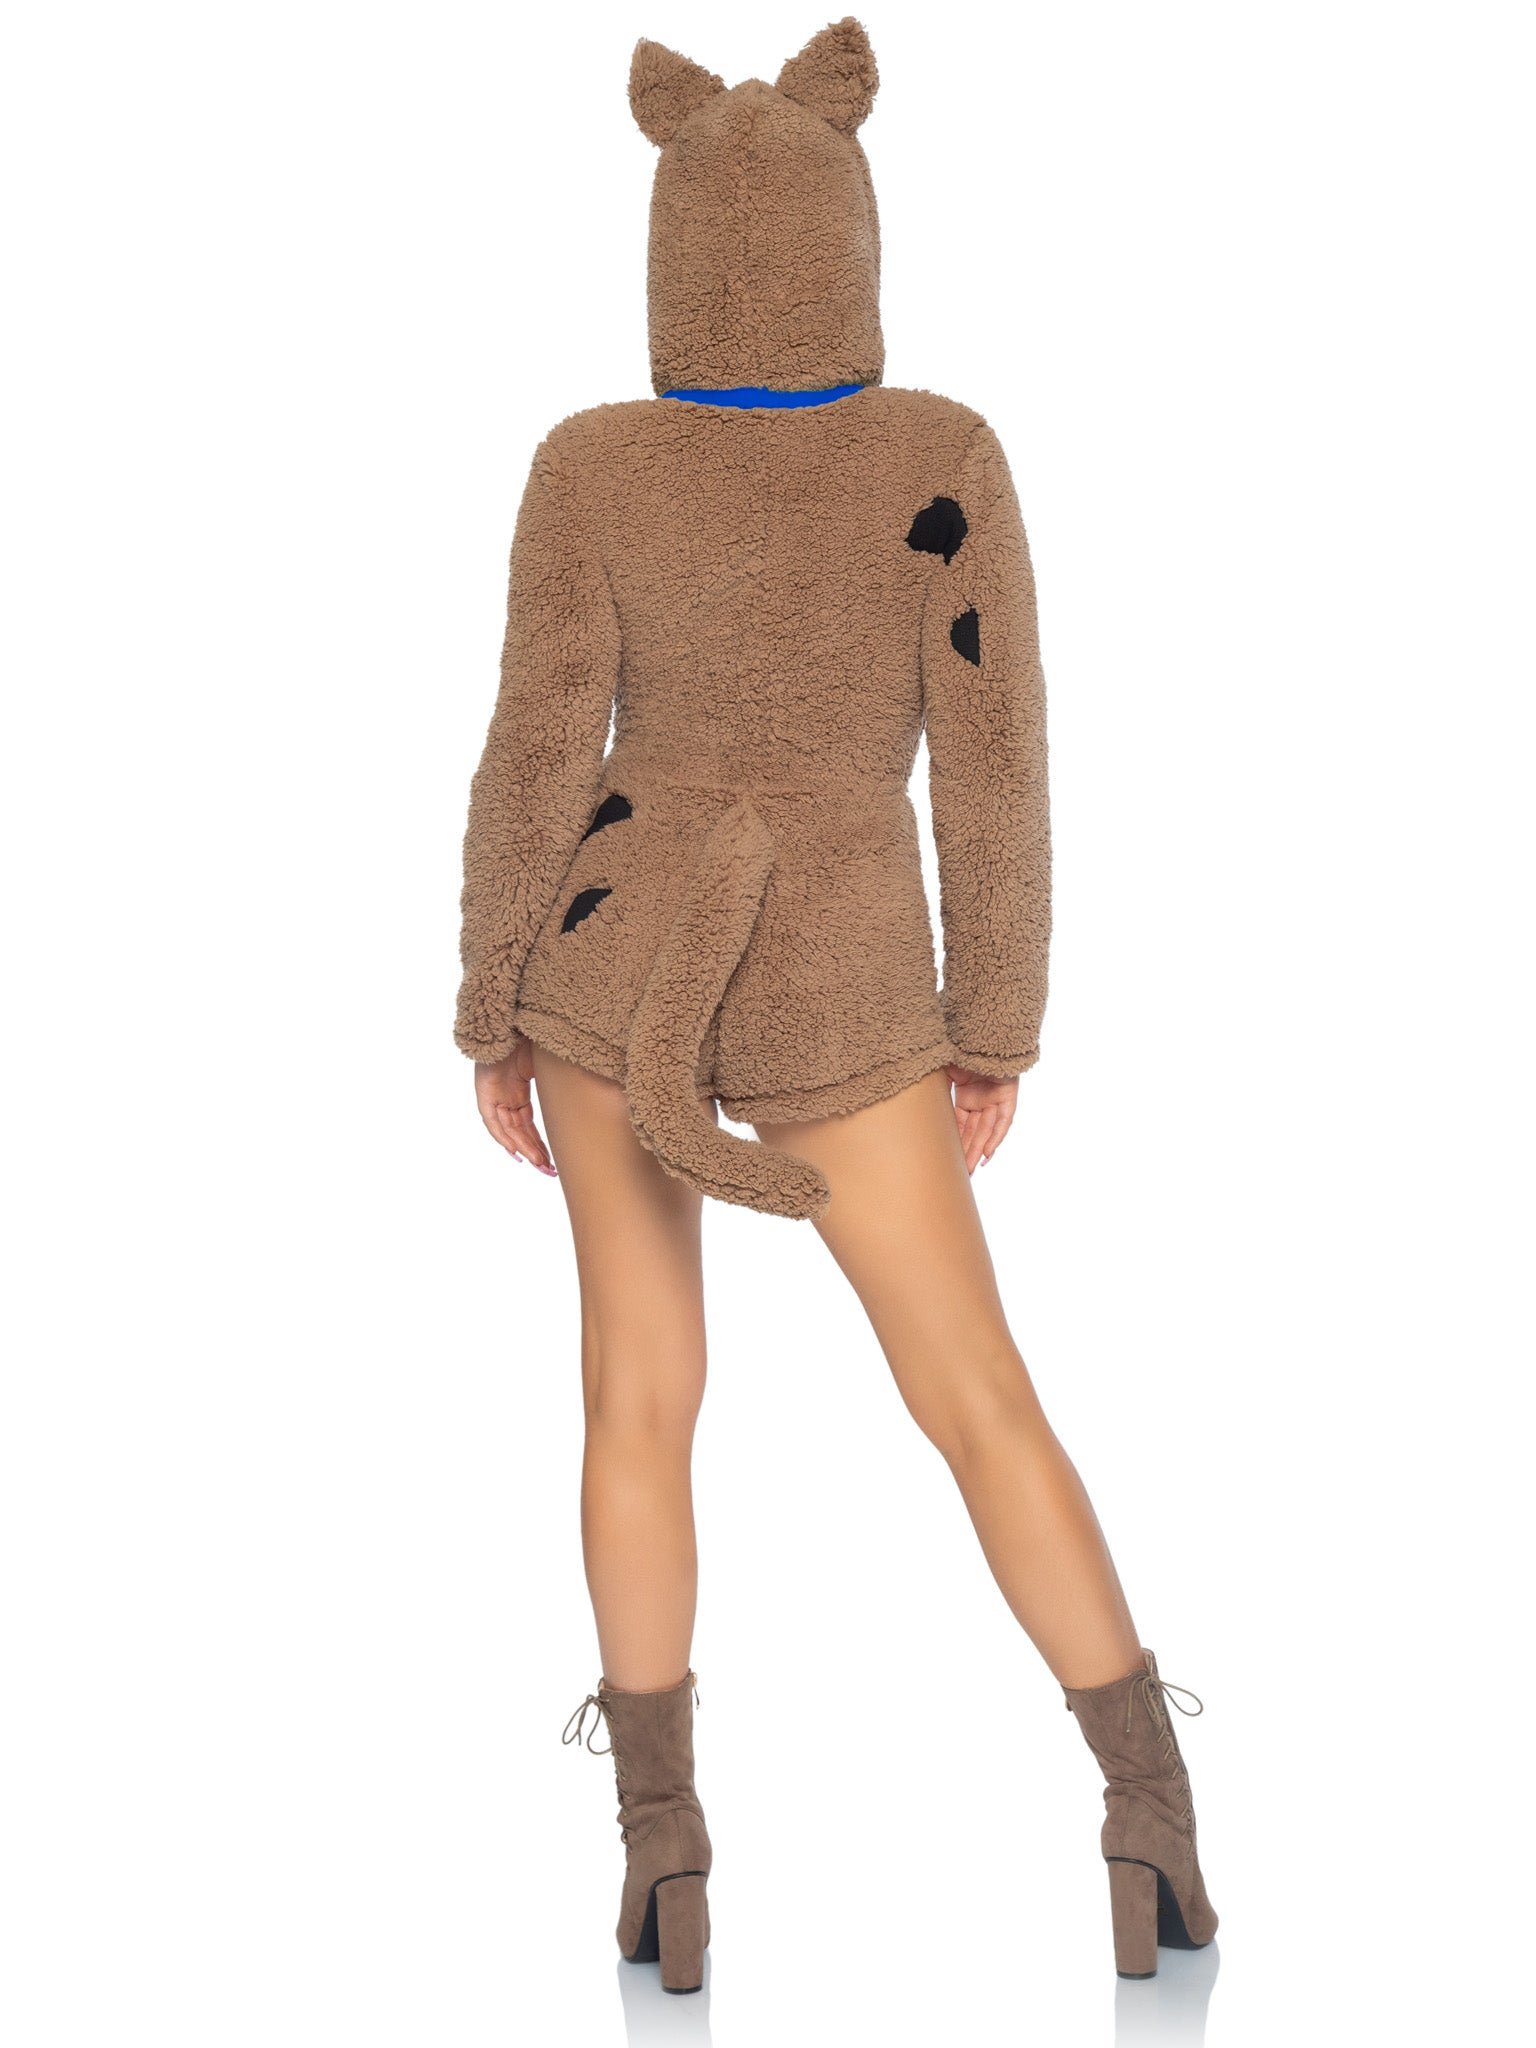 Adult Cash Me Out Hooded Romper Women Costume, $27.99